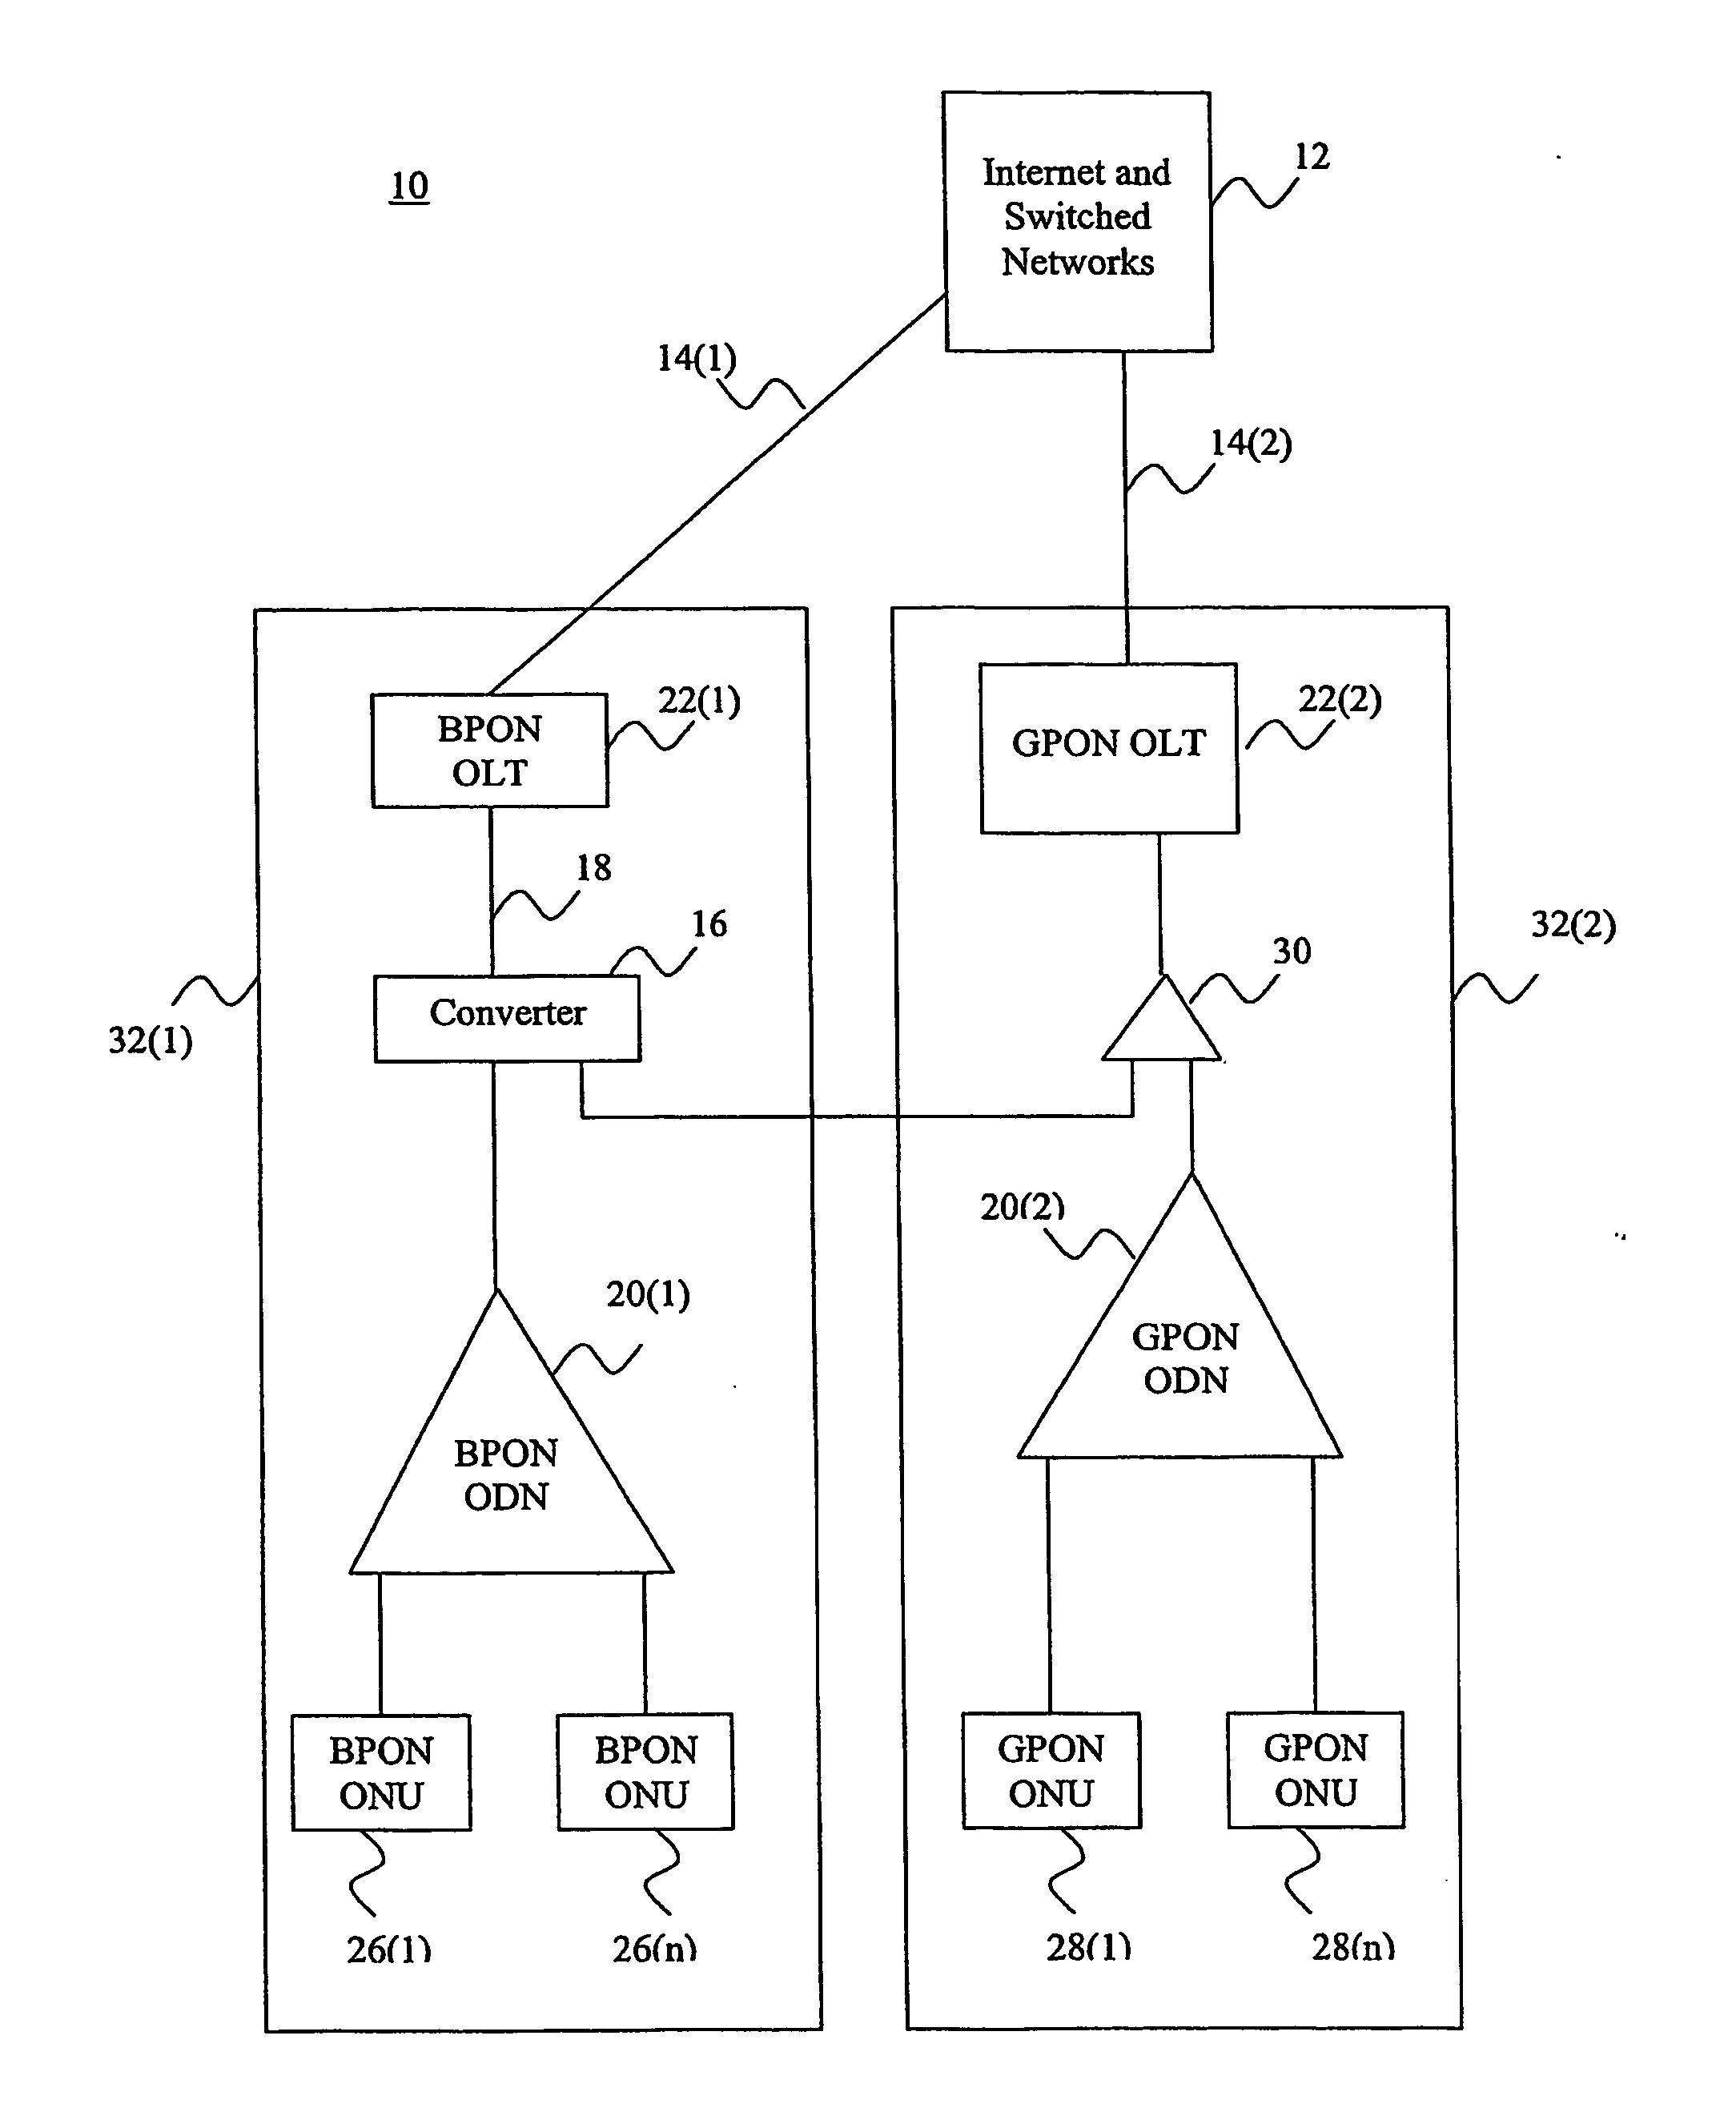 Method and apparatus for communicating between a legacy pon network and an upgraded pon network